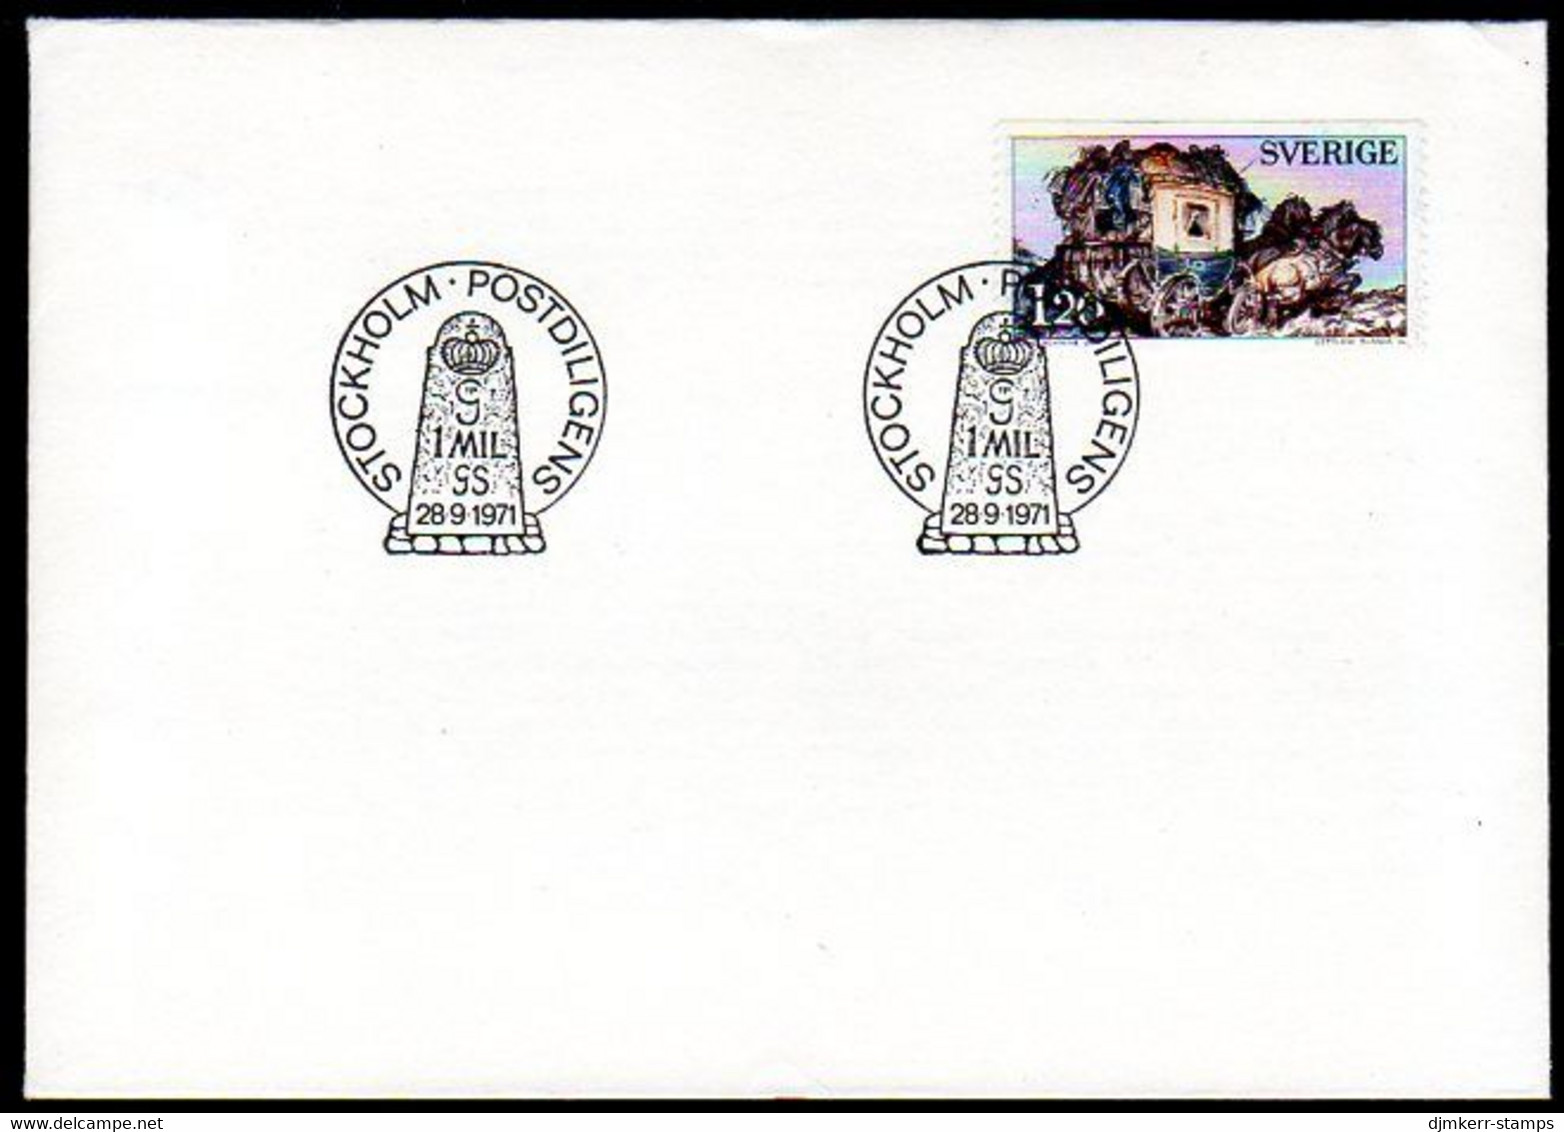 SWEDEN 1971 Mail Coach FDC.  Michel 716 - FDC